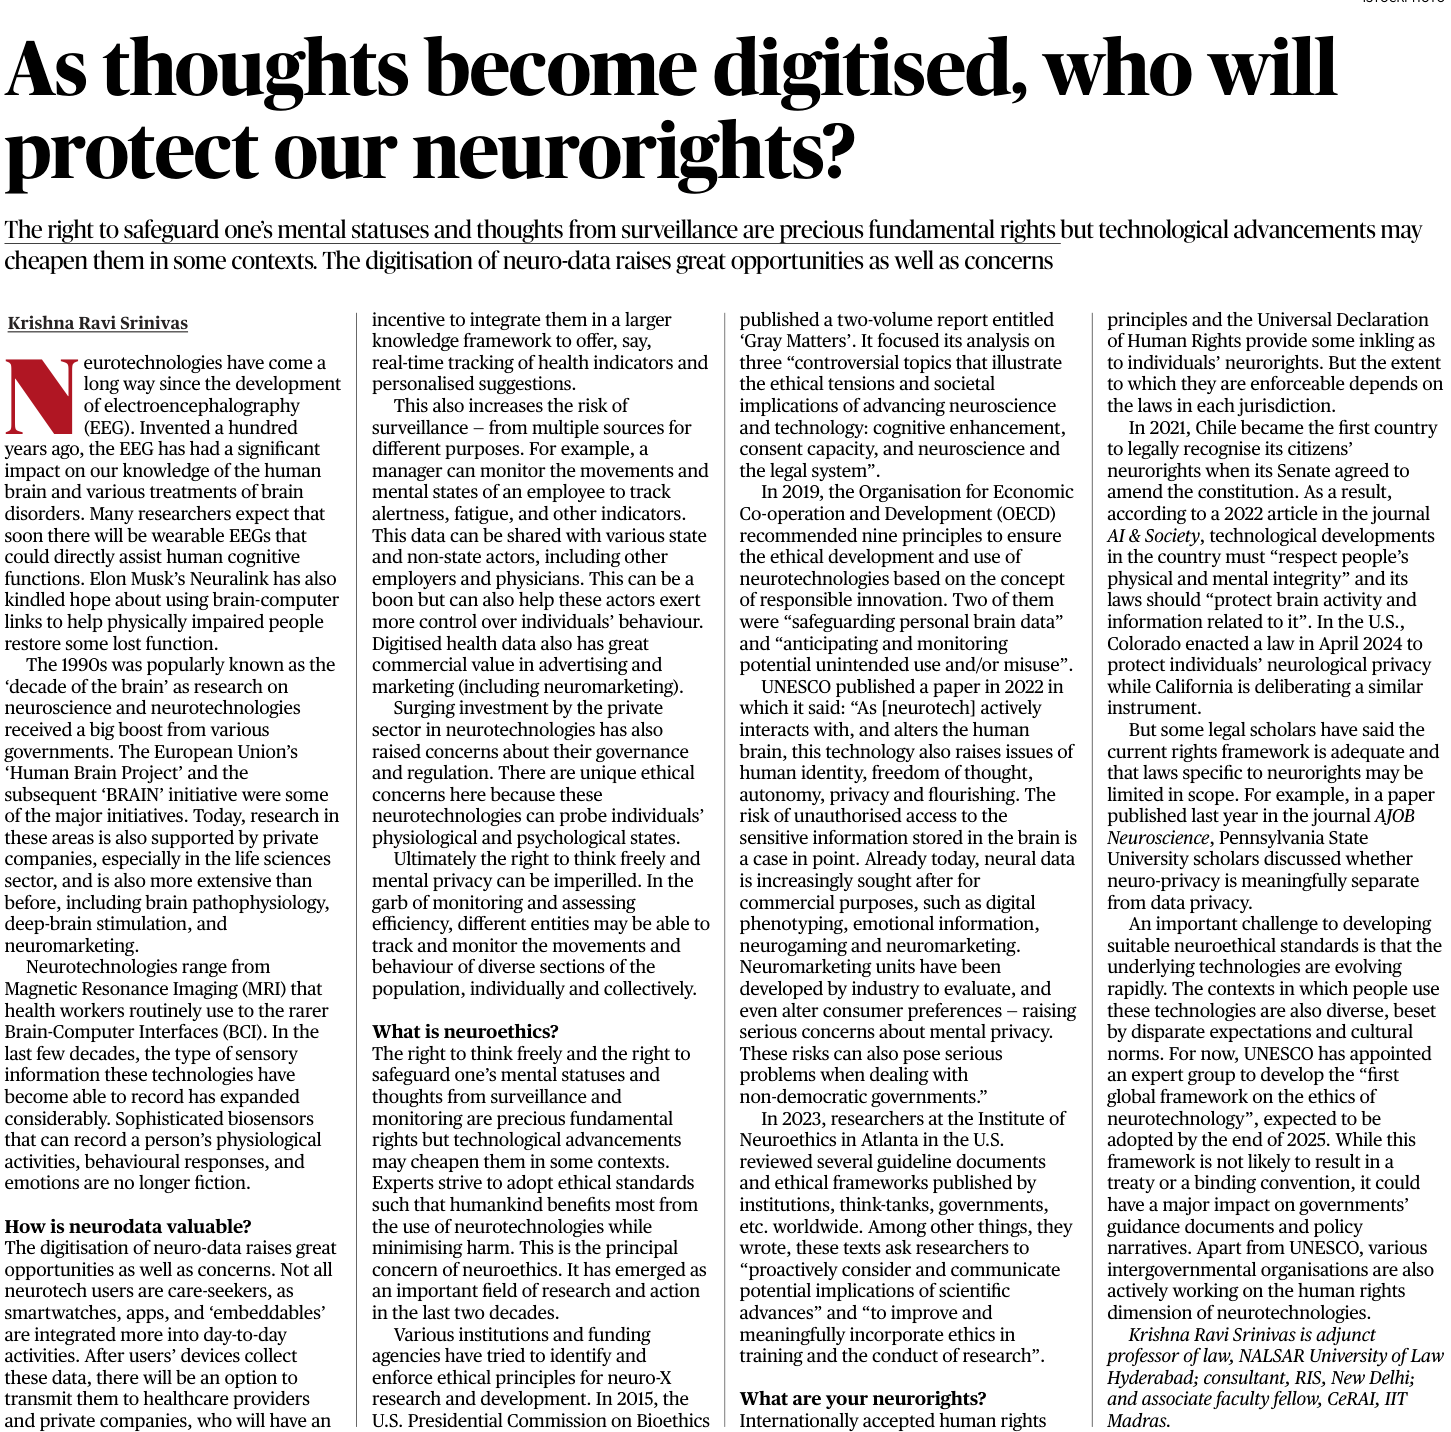 As thoughts become digitised, who will protect our neurorights? | The Hindu